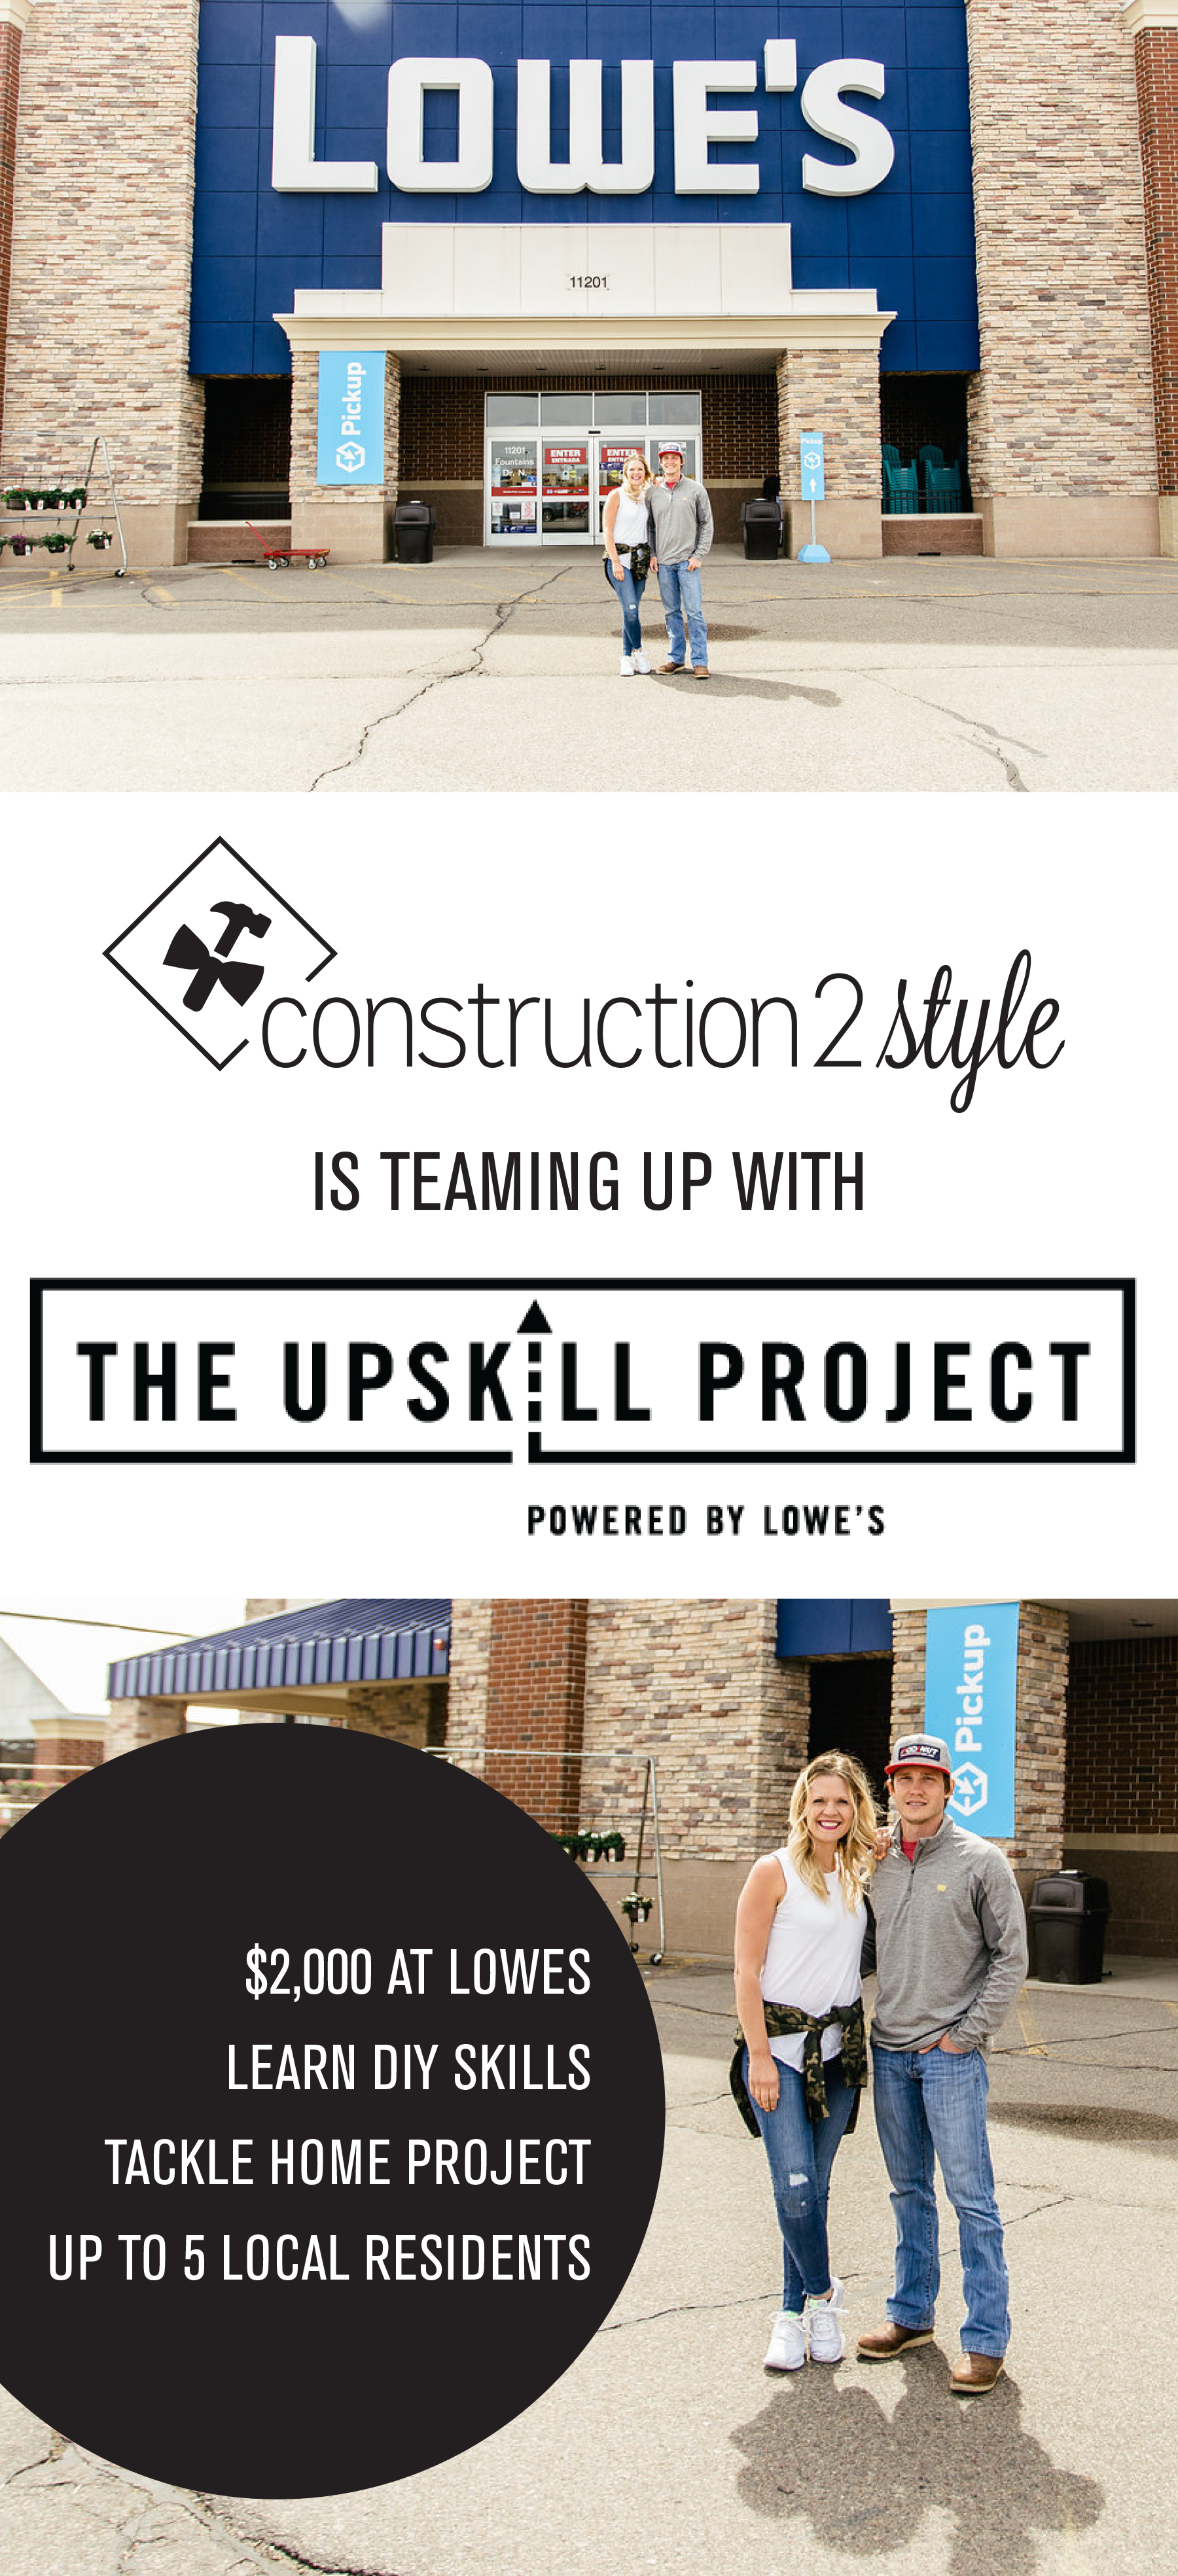 lowe's upskill project | construction2style